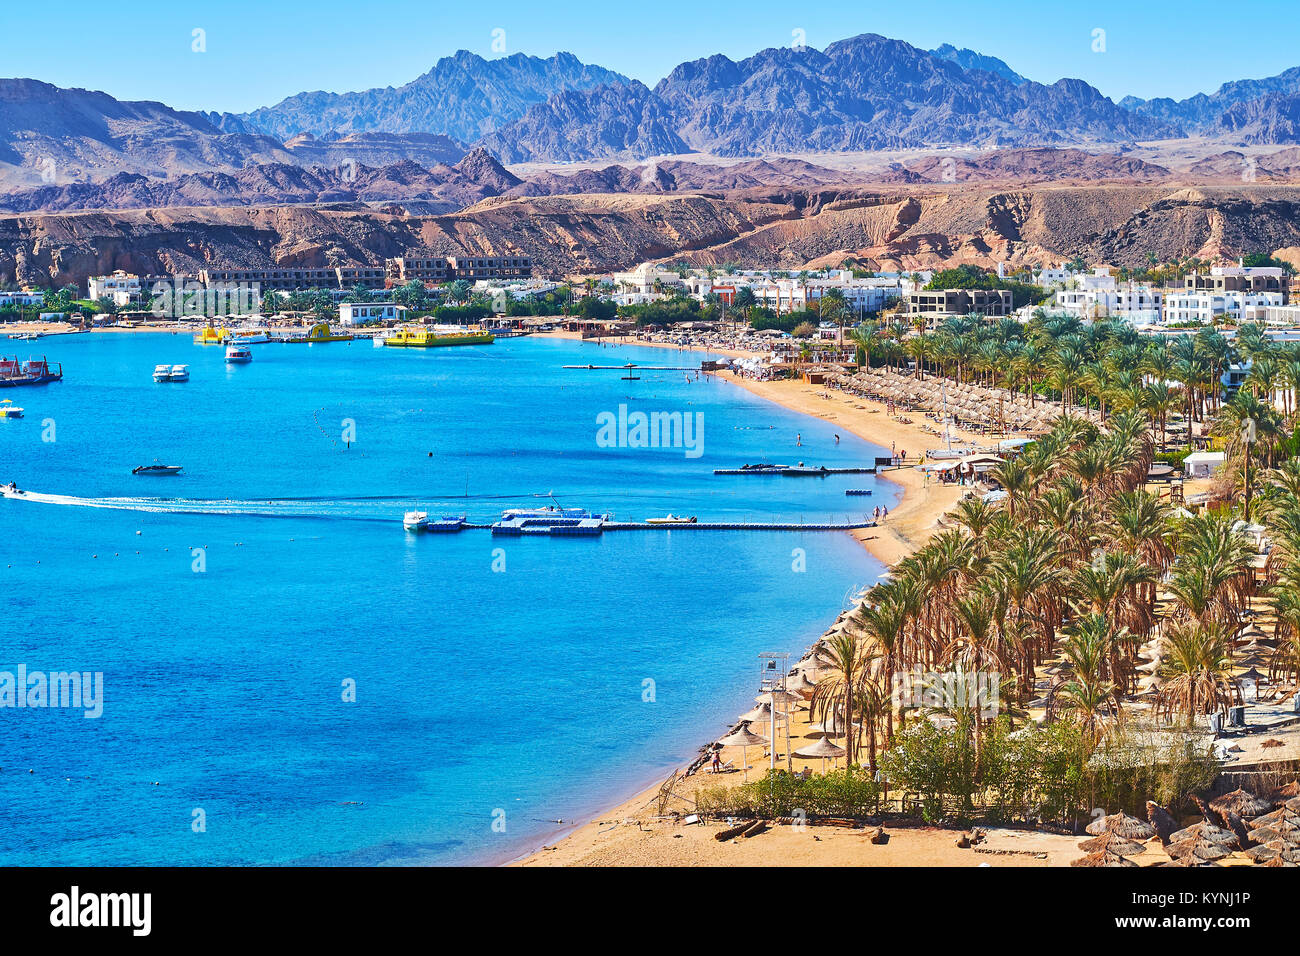 The comfortable sand beach line of El Maya bay, surrounded by giant rocky mountains, Sharm El Sheikh, Egypt. Stock Photo